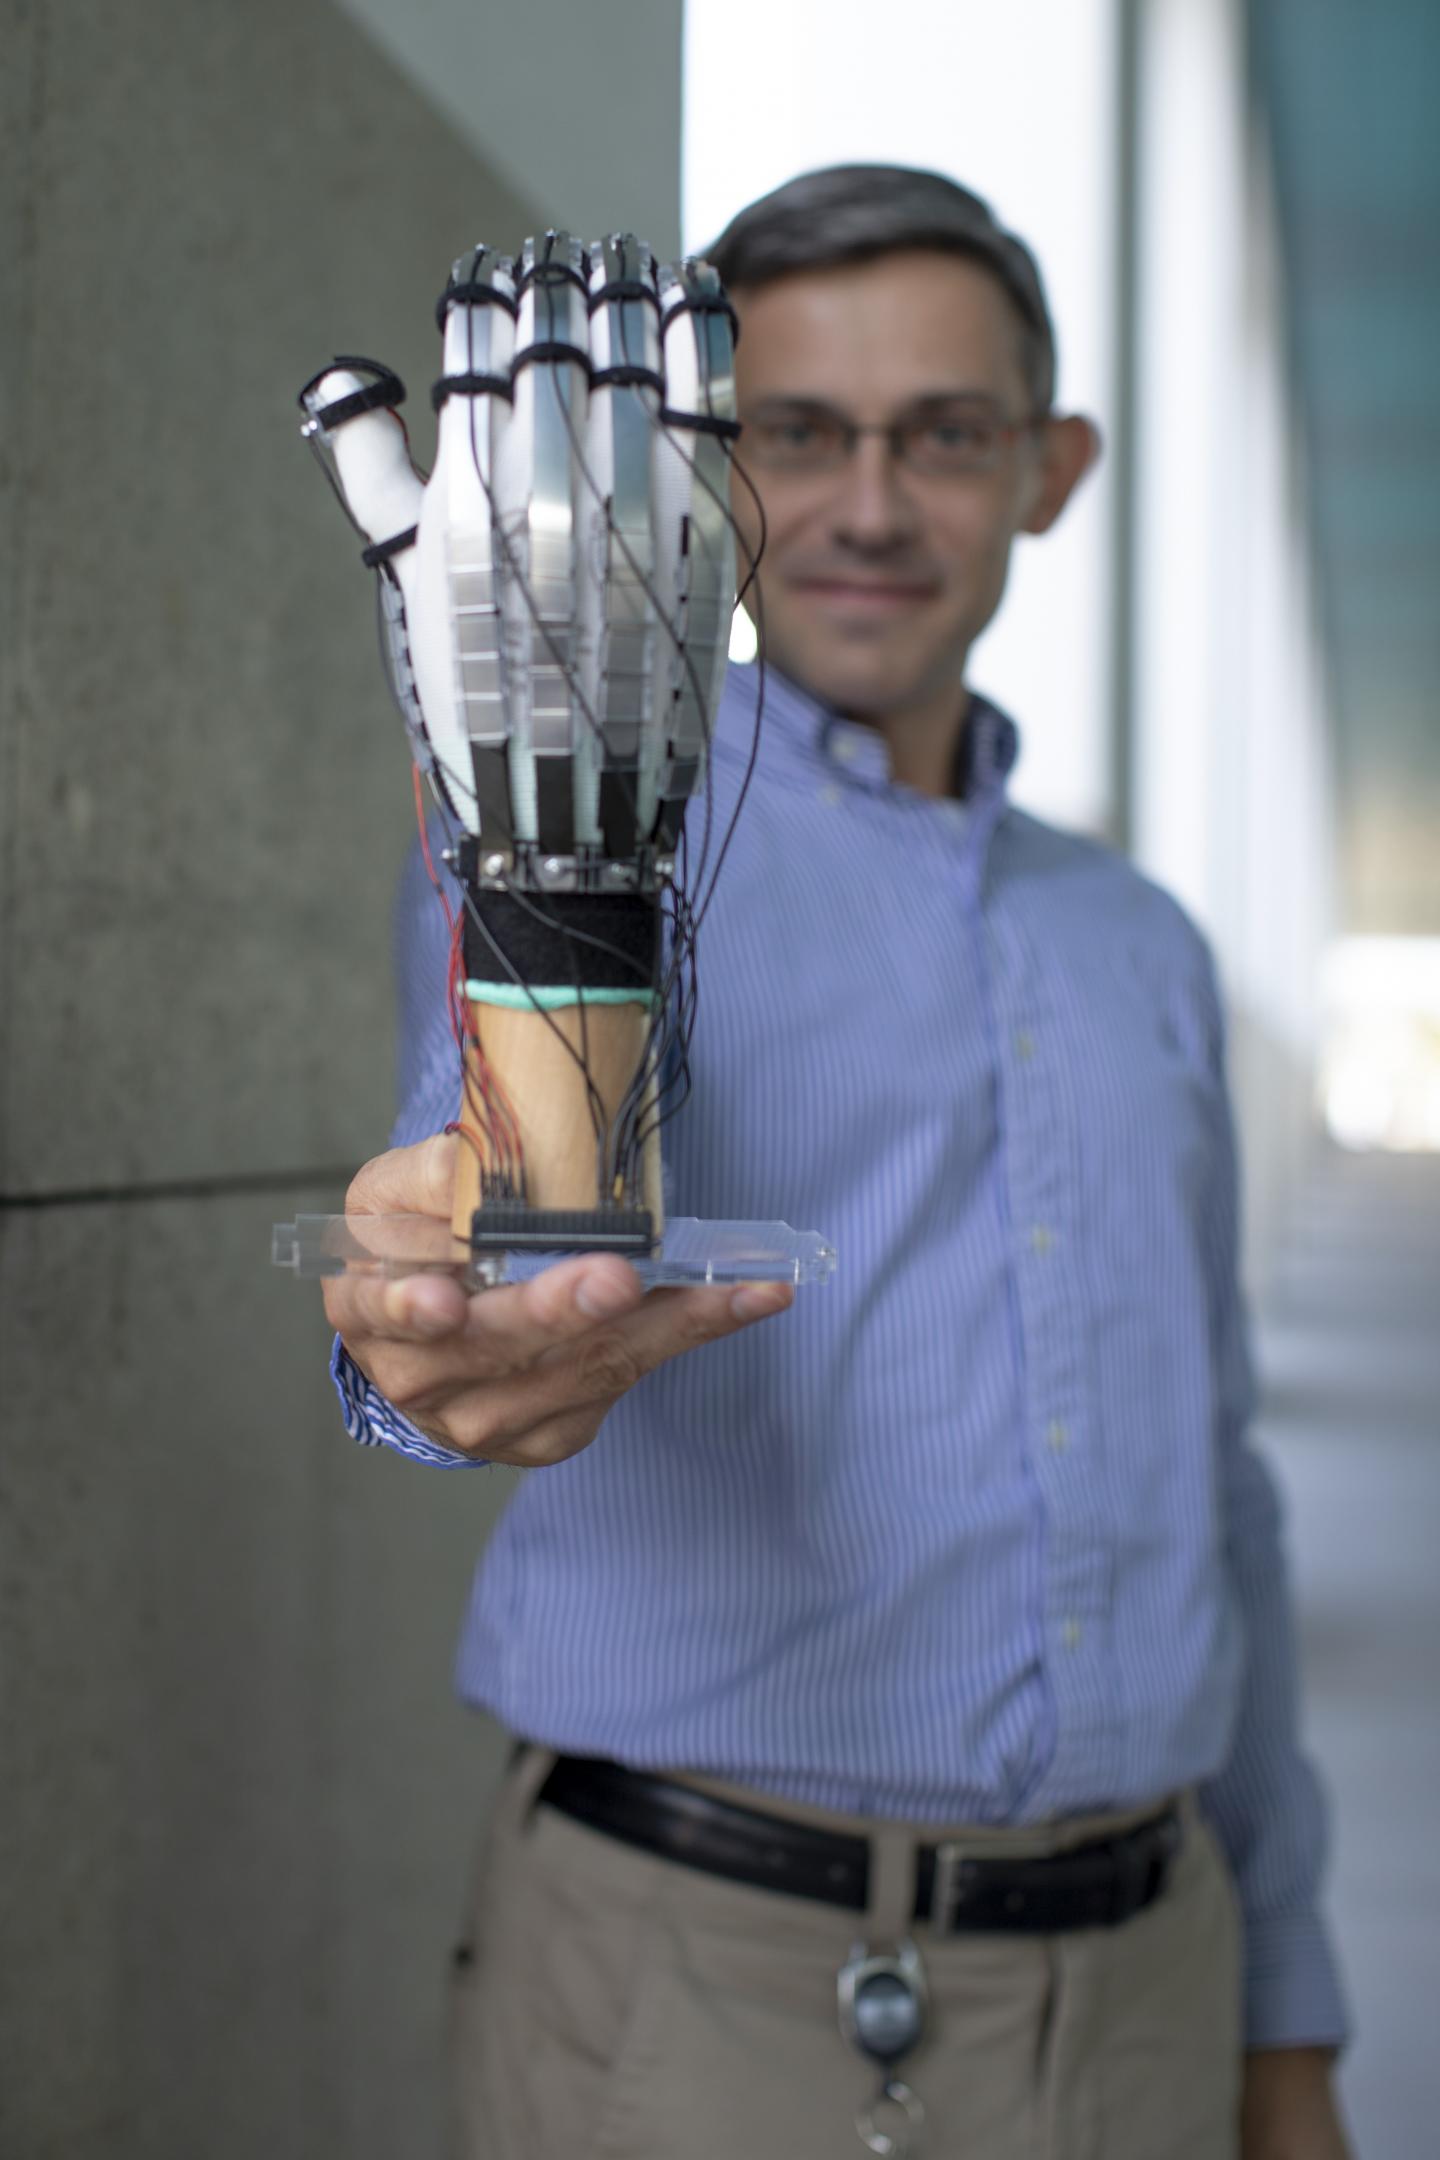 Ultra-light Gloves Let Users 'Touch' Virtual Objects